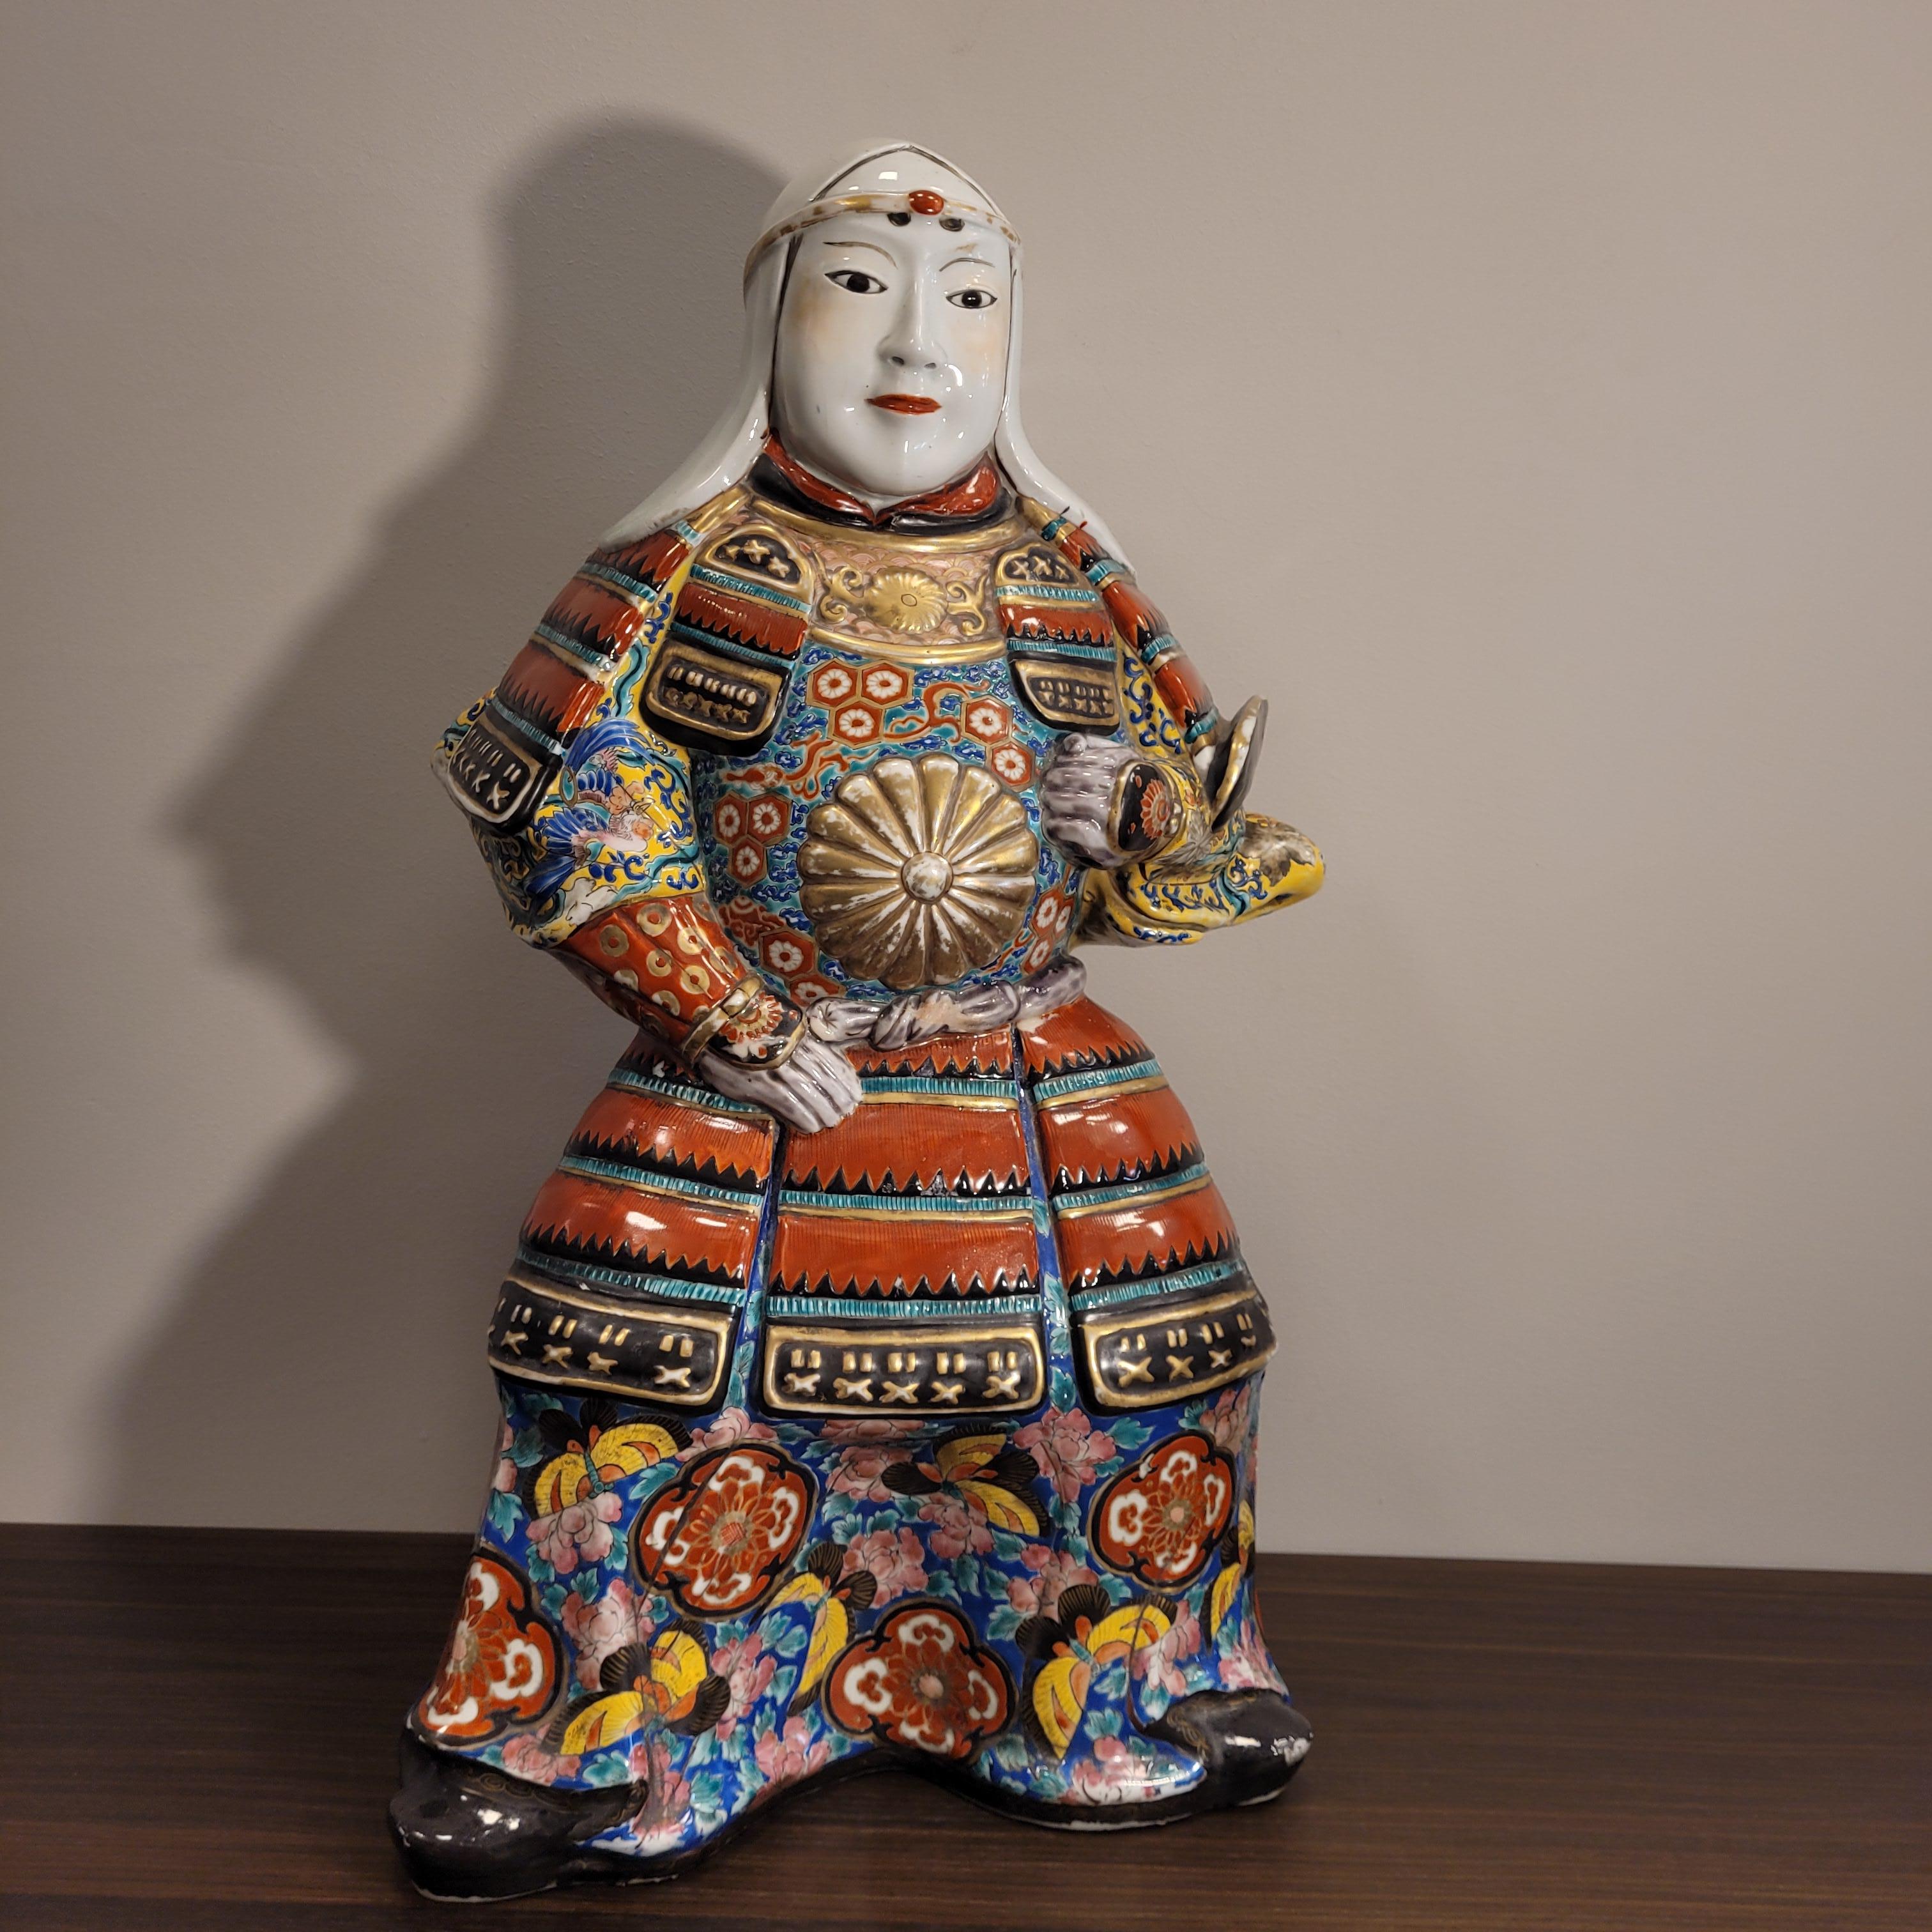 Extraordinary and large samurai in hand-painted porcelain with the characteristic habit of the Edo period 1603-1868, when the Tokugawa family ruled Japan. This era is named after the city of Edo, present-day Tokyo.
The origin of the samurai dates